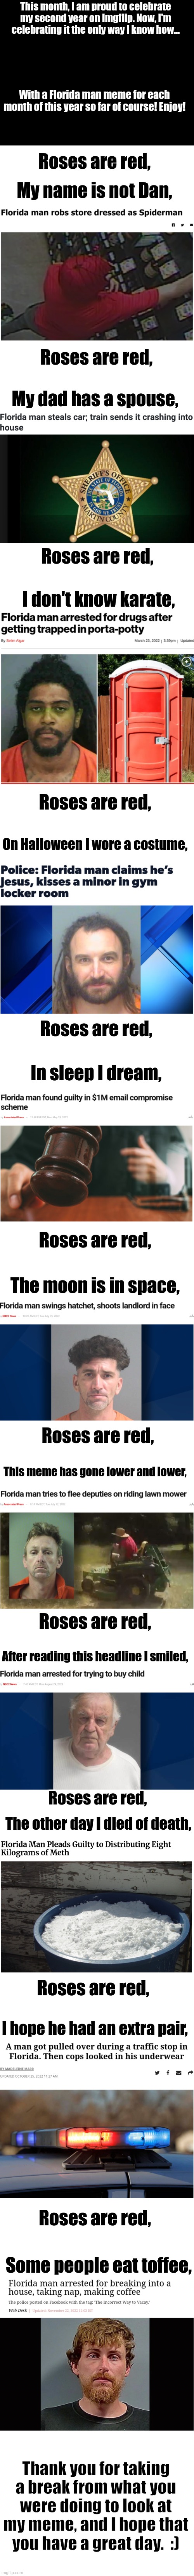 Thank you for sticking with me for the past 2 years :) |  This month, I am proud to celebrate my second year on Imgflip. Now, I'm celebrating it the only way I know how... With a Florida man meme for each month of this year so far of course! Enjoy! Roses are red, My name is not Dan, Roses are red, My dad has a spouse, Roses are red, I don't know karate, Roses are red, On Halloween I wore a costume, Roses are red, In sleep I dream, Roses are red, The moon is in space, Roses are red, This meme has gone lower and lower, Roses are red, After reading this headline I smiled, Roses are red, The other day I died of death, Roses are red, I hope he had an extra pair, Roses are red, Some people eat toffee, Thank you for taking a break from what you were doing to look at my meme, and I hope that you have a great day.  :) | image tagged in blank white template,long meme,florida man,imgflip anniversary,oh wow are you actually reading these tags,stop reading the tags | made w/ Imgflip meme maker